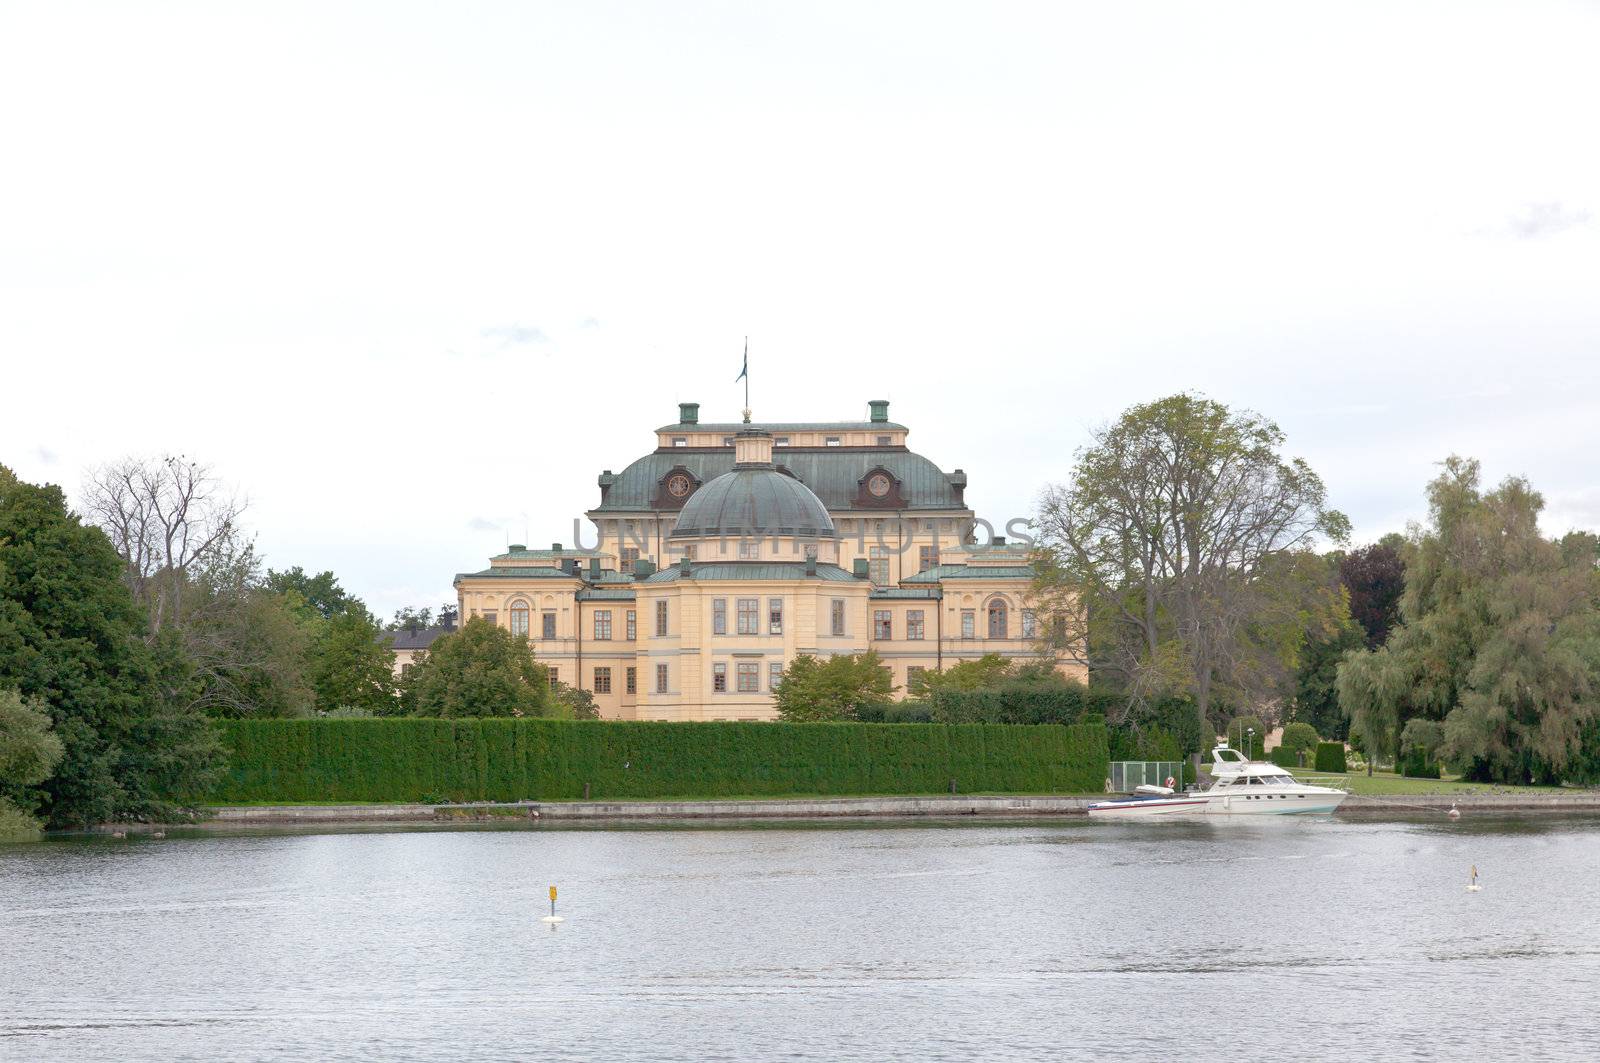 Drottningholms Palace in the Stockholm city by gary718